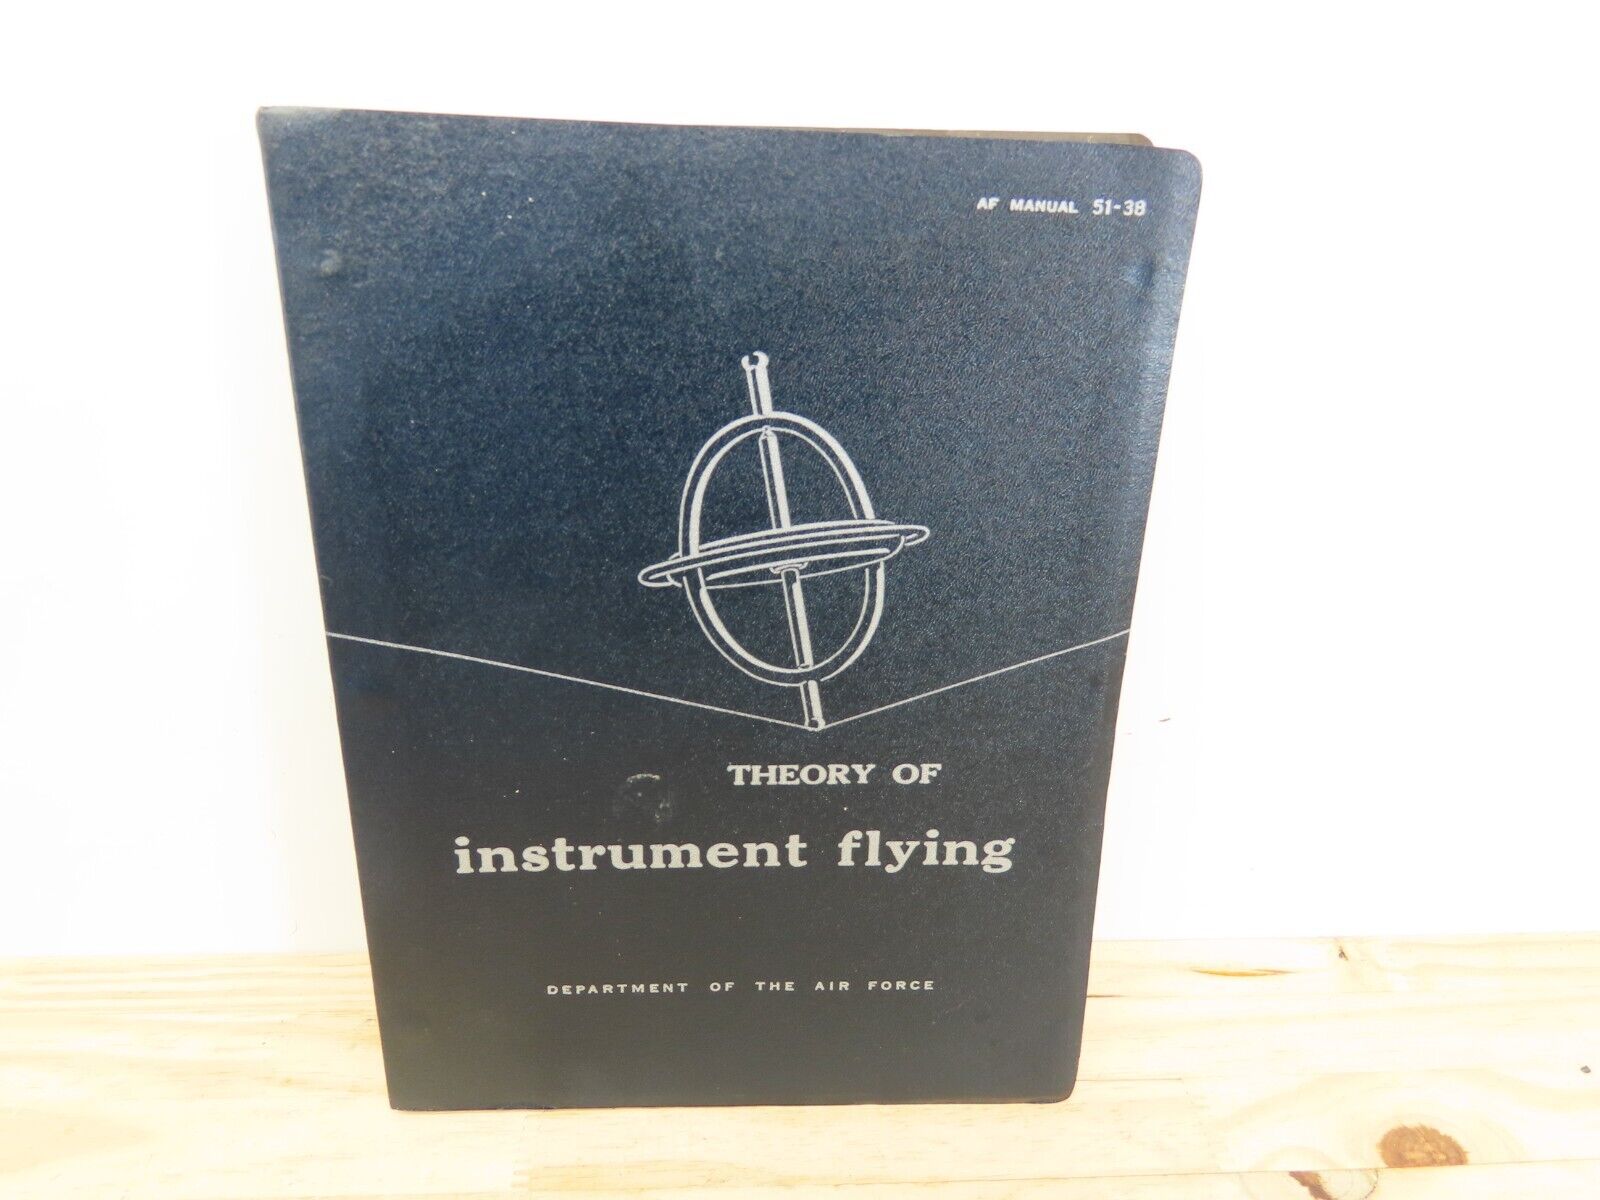 Theory Of Instrument Flying Dept. Of The Air Force Manual 51-38 1954  Cold War